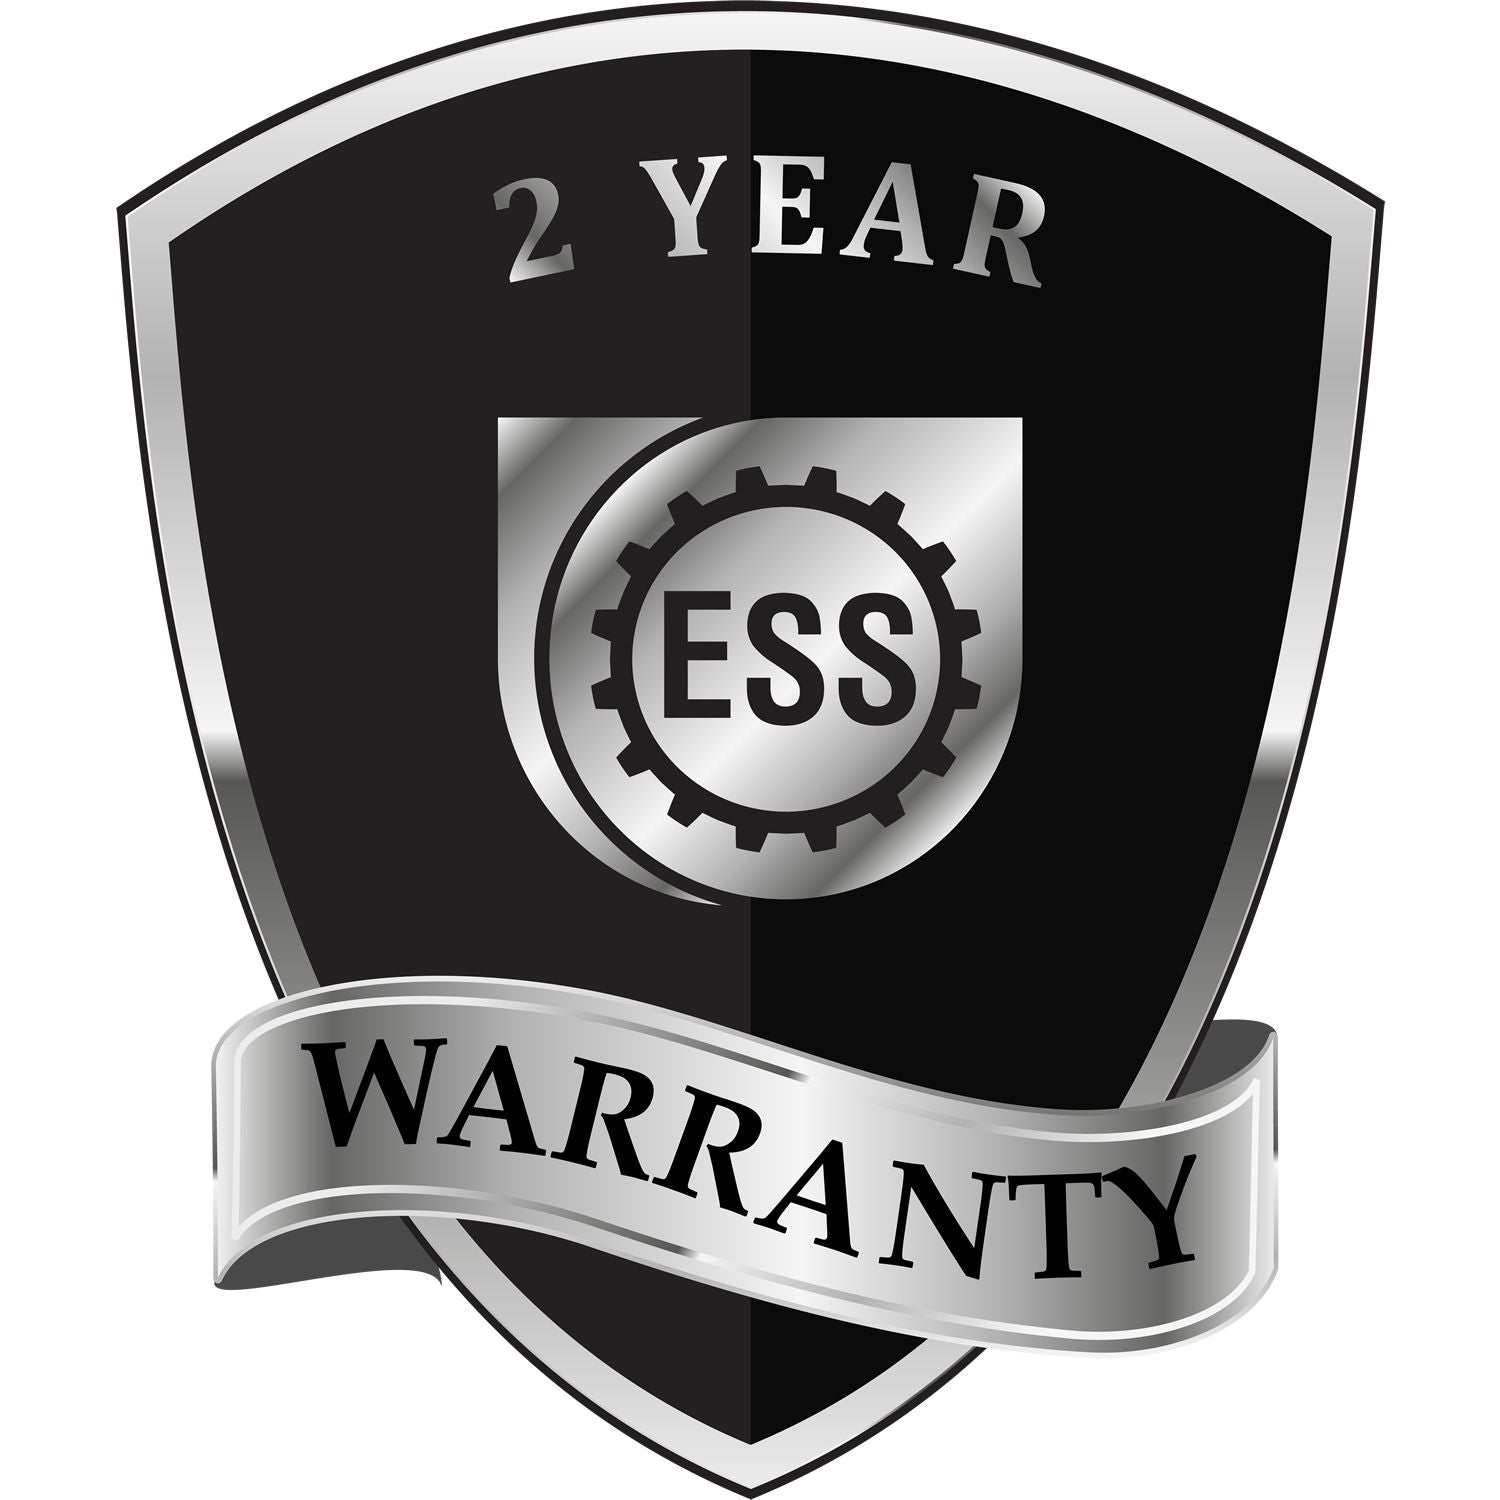 A badge or emblem showing a warranty icon for the Long Reach Wisconsin PE Seal